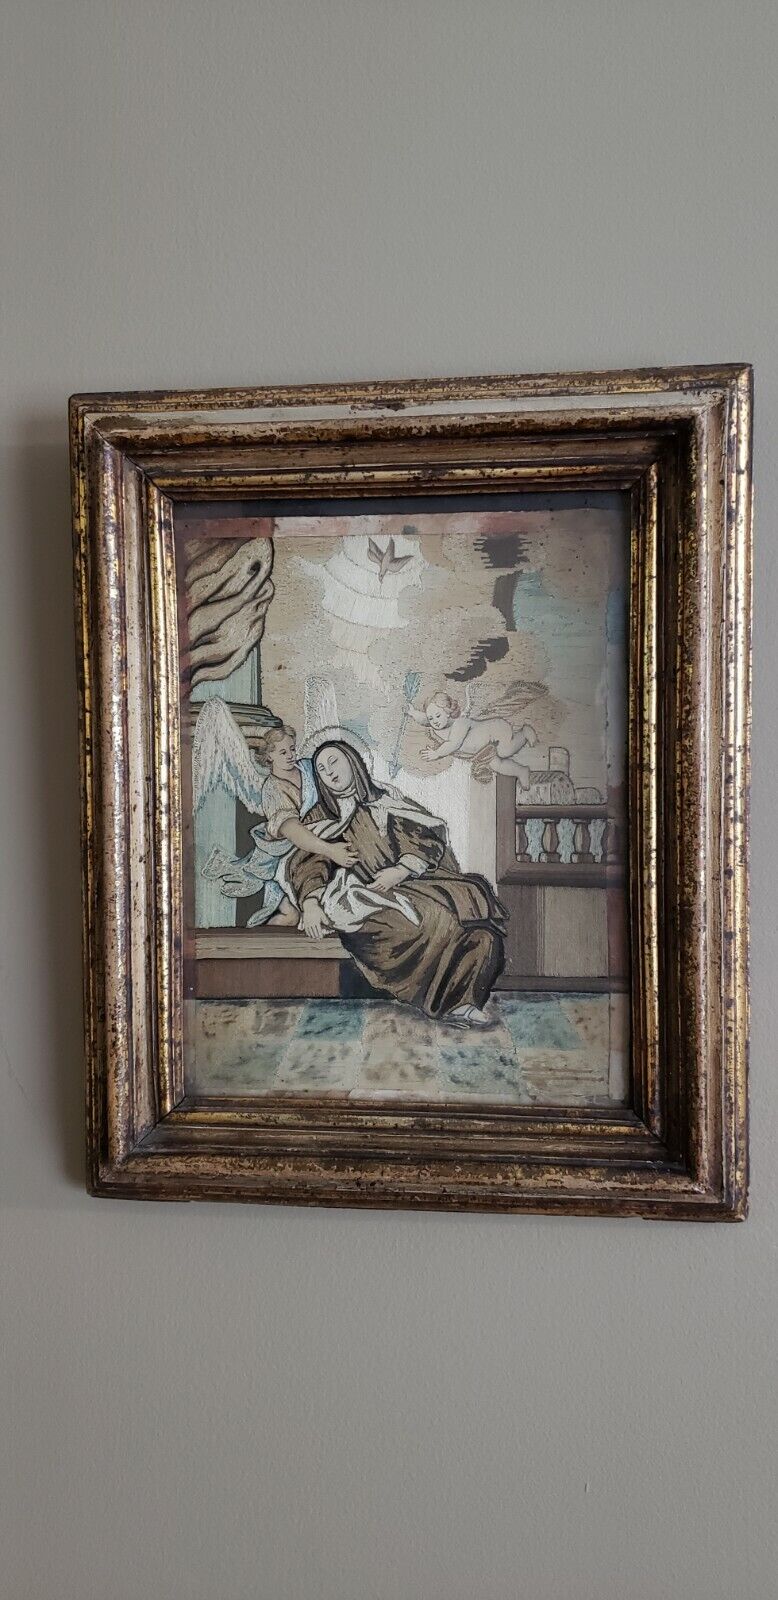 Antique 18th century Framed Embroidery on Silk, The Ecstasy of St. Teresa